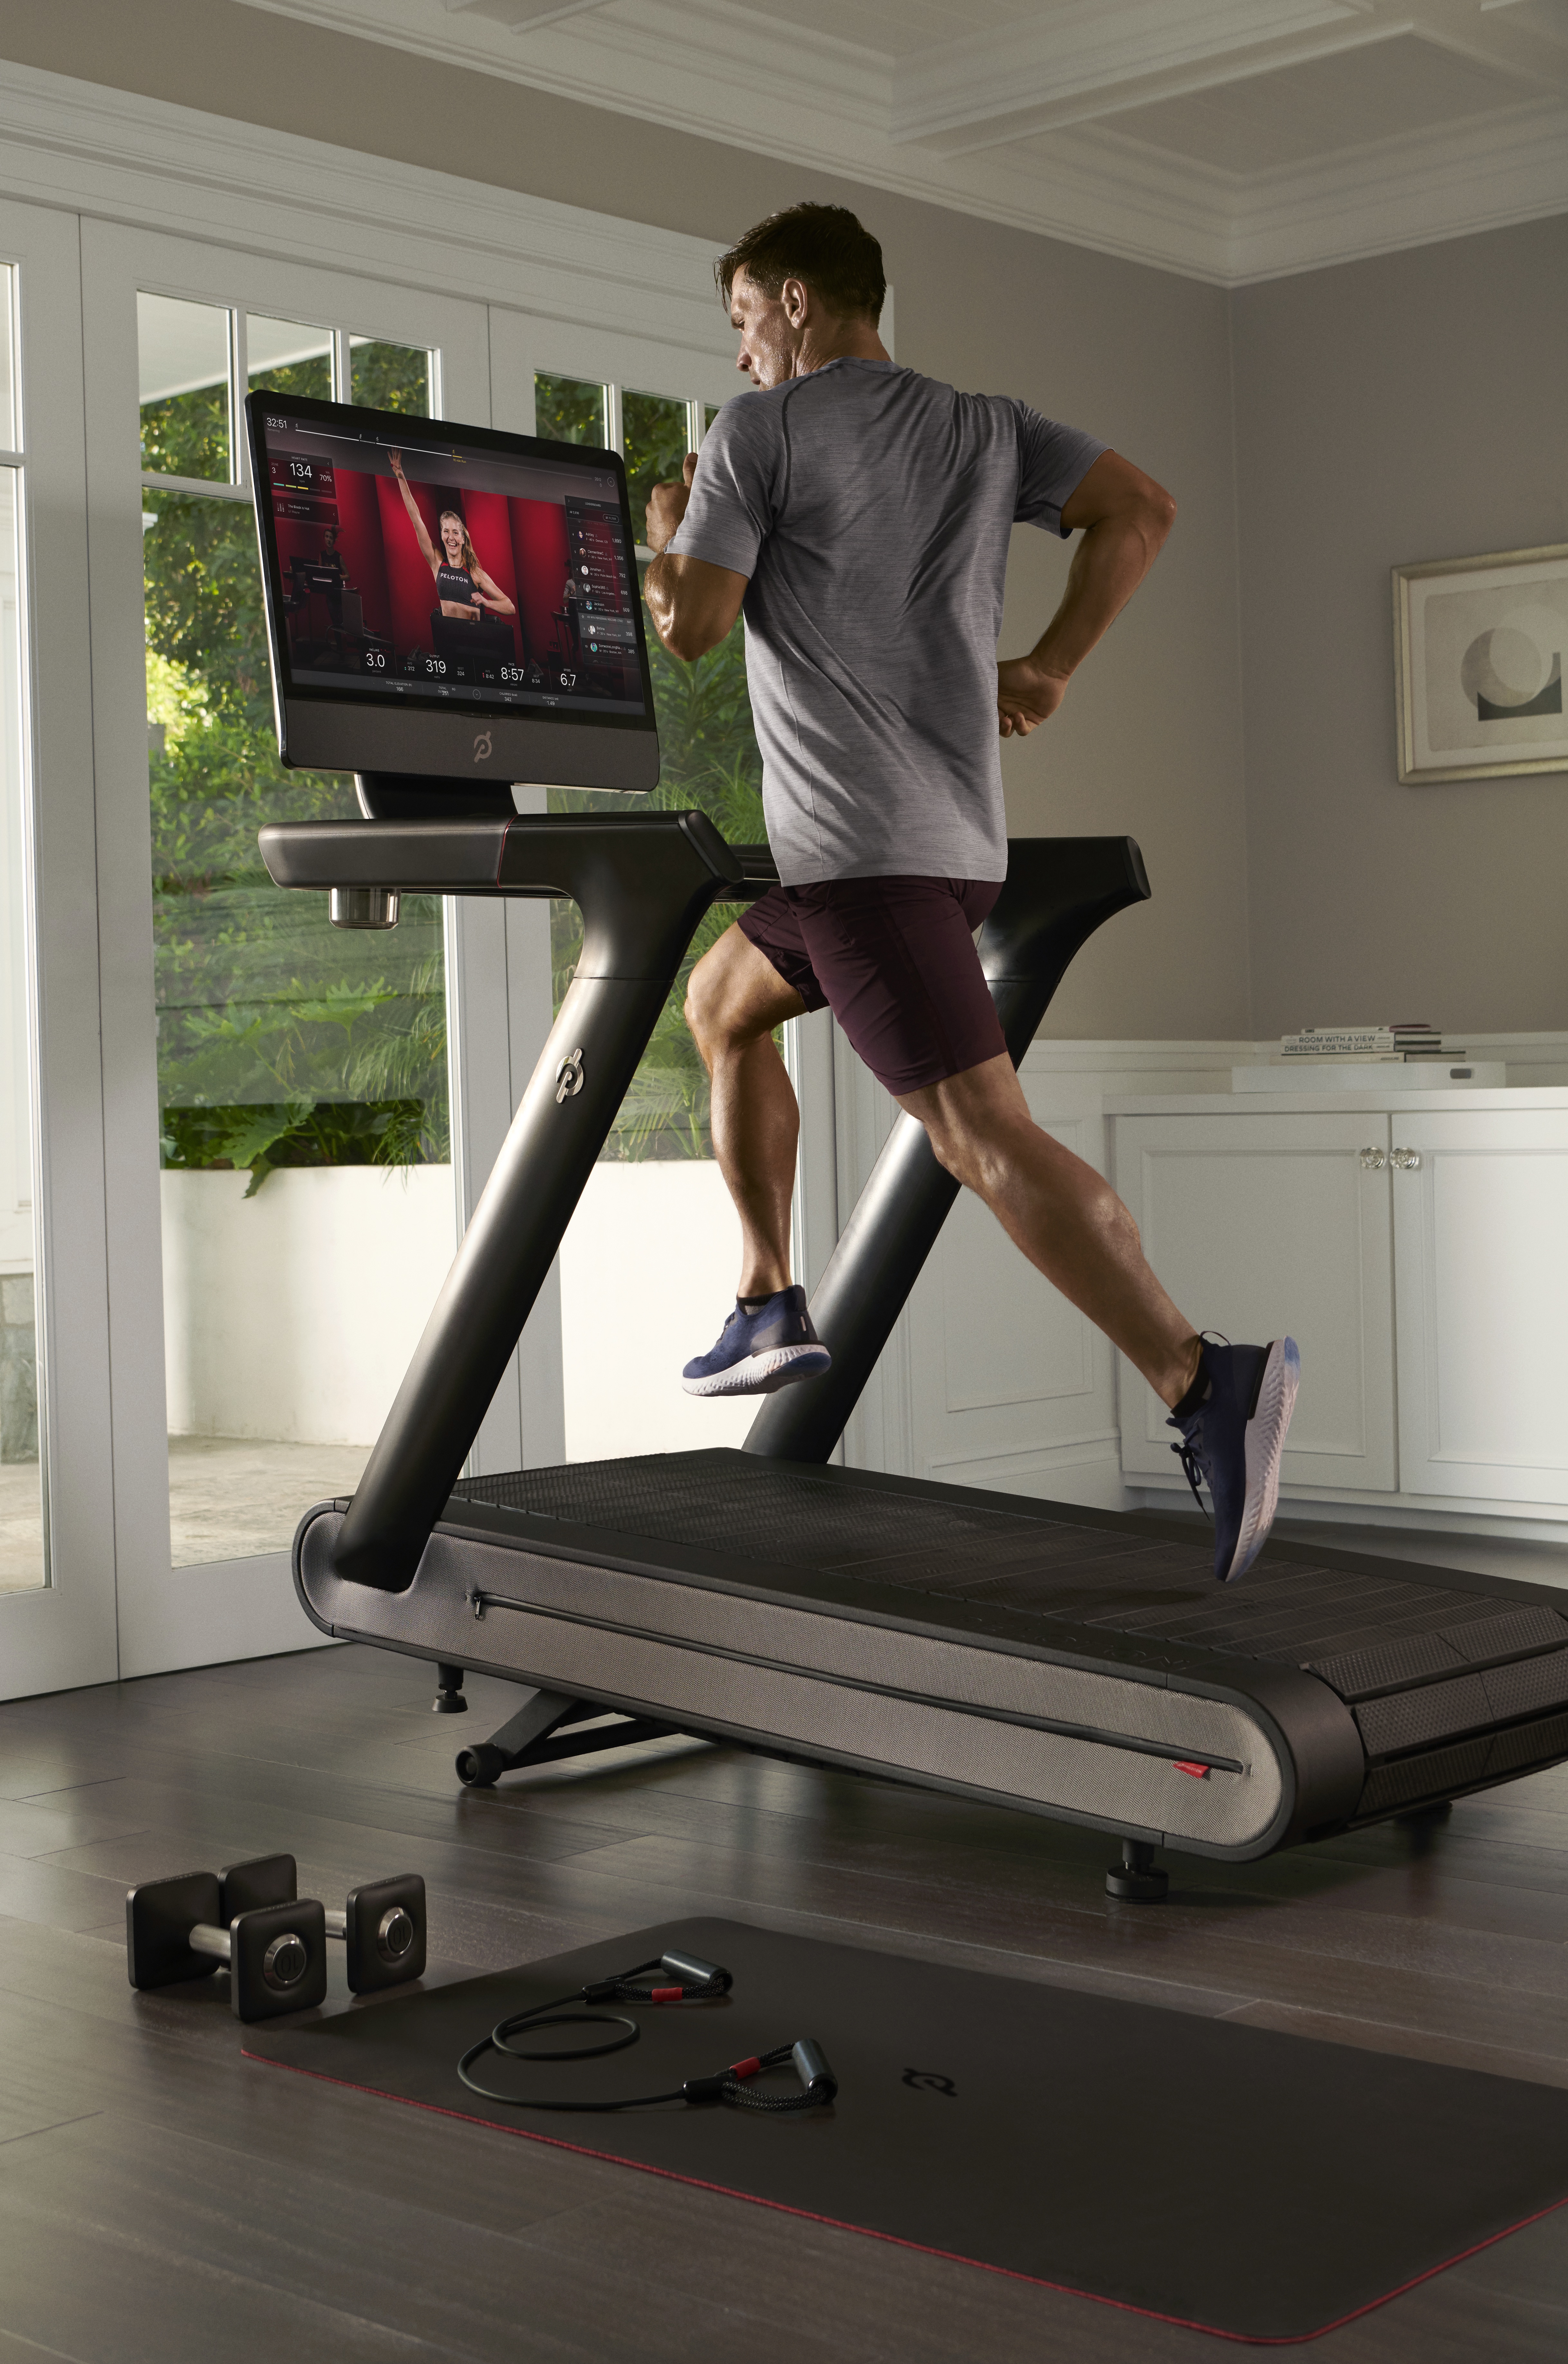 15 Top Images Peloton Running App For Beginners - Treadmills To Use With The Peloton App Gym For Beginners Treadmill Workouts Treadmill